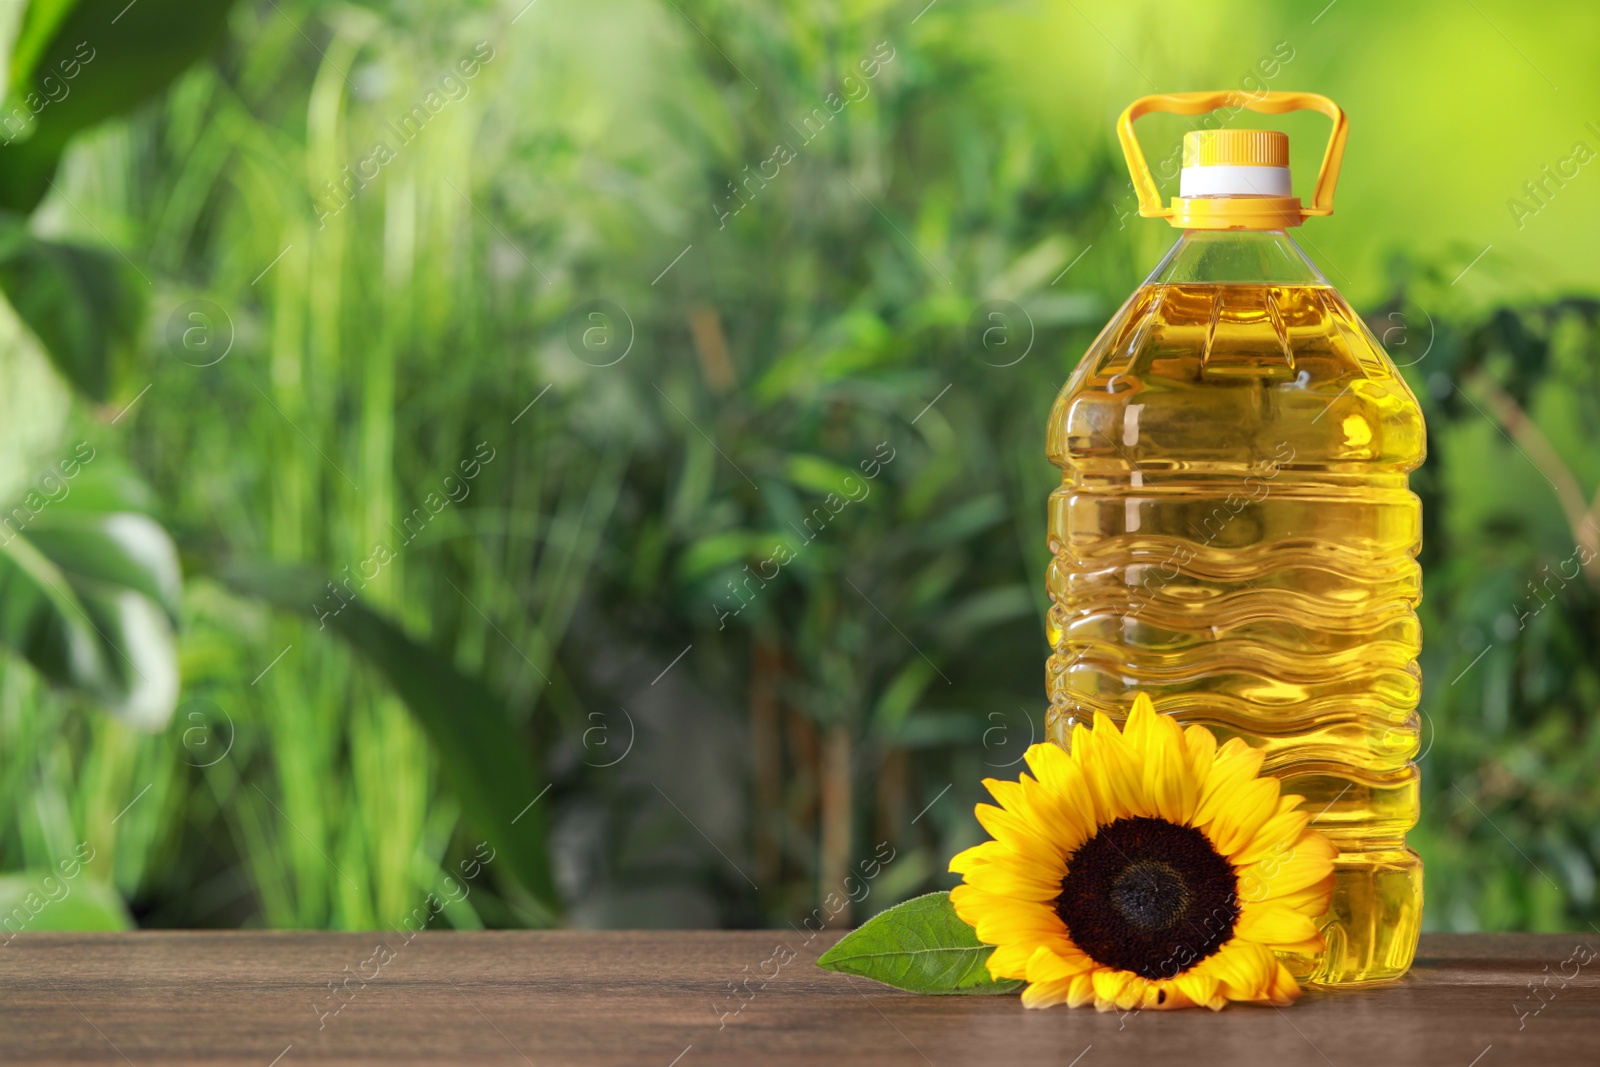 Photo of Bottle of cooking oil and sunflower on wooden table against blurred background, space for text